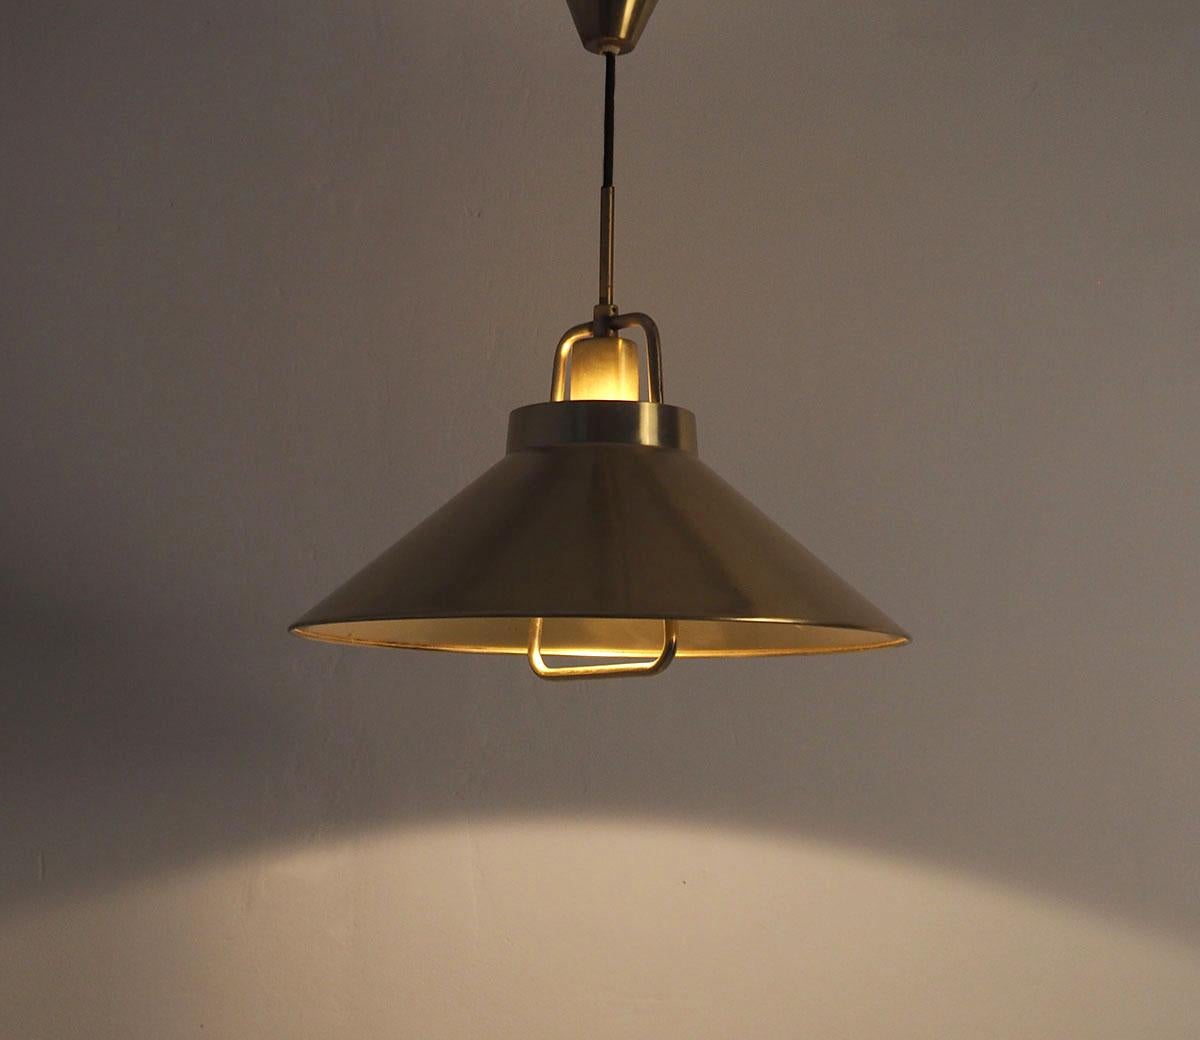 Brass rise and fall hanging lamp designed by Fritz Schlegel produced by Lyfa 1960s

Model P295.

The lamp is adjustable in height using a pulley in a brass housing. The lamp can be adjusted smoothly by pulling or pushing the lamp upwards.

Ideal as